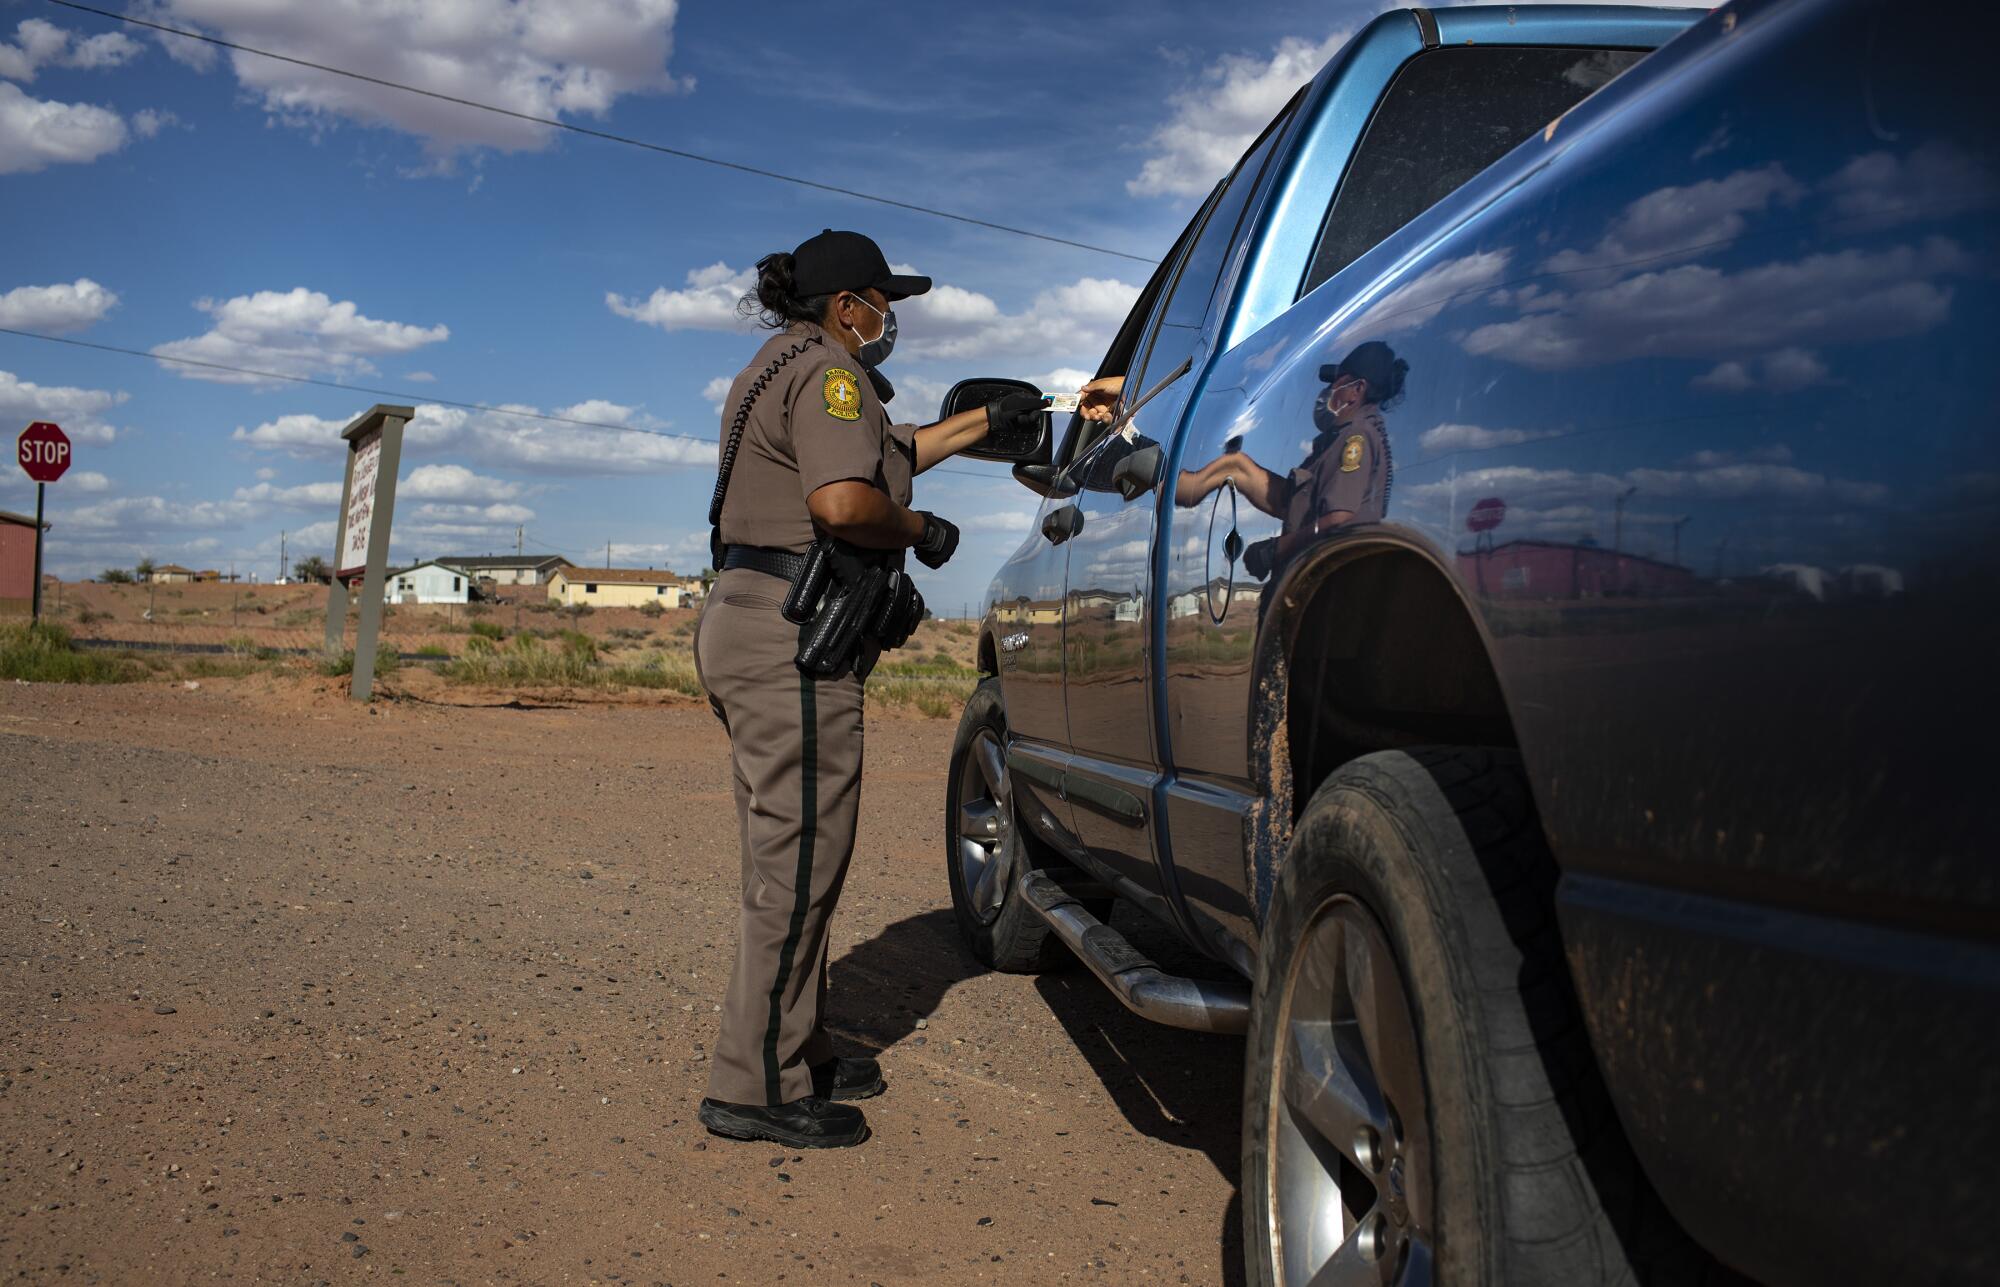 Navajo Nation Officer Carolyn Tallsalt checks identification after pulling over a woman for violating a curfew